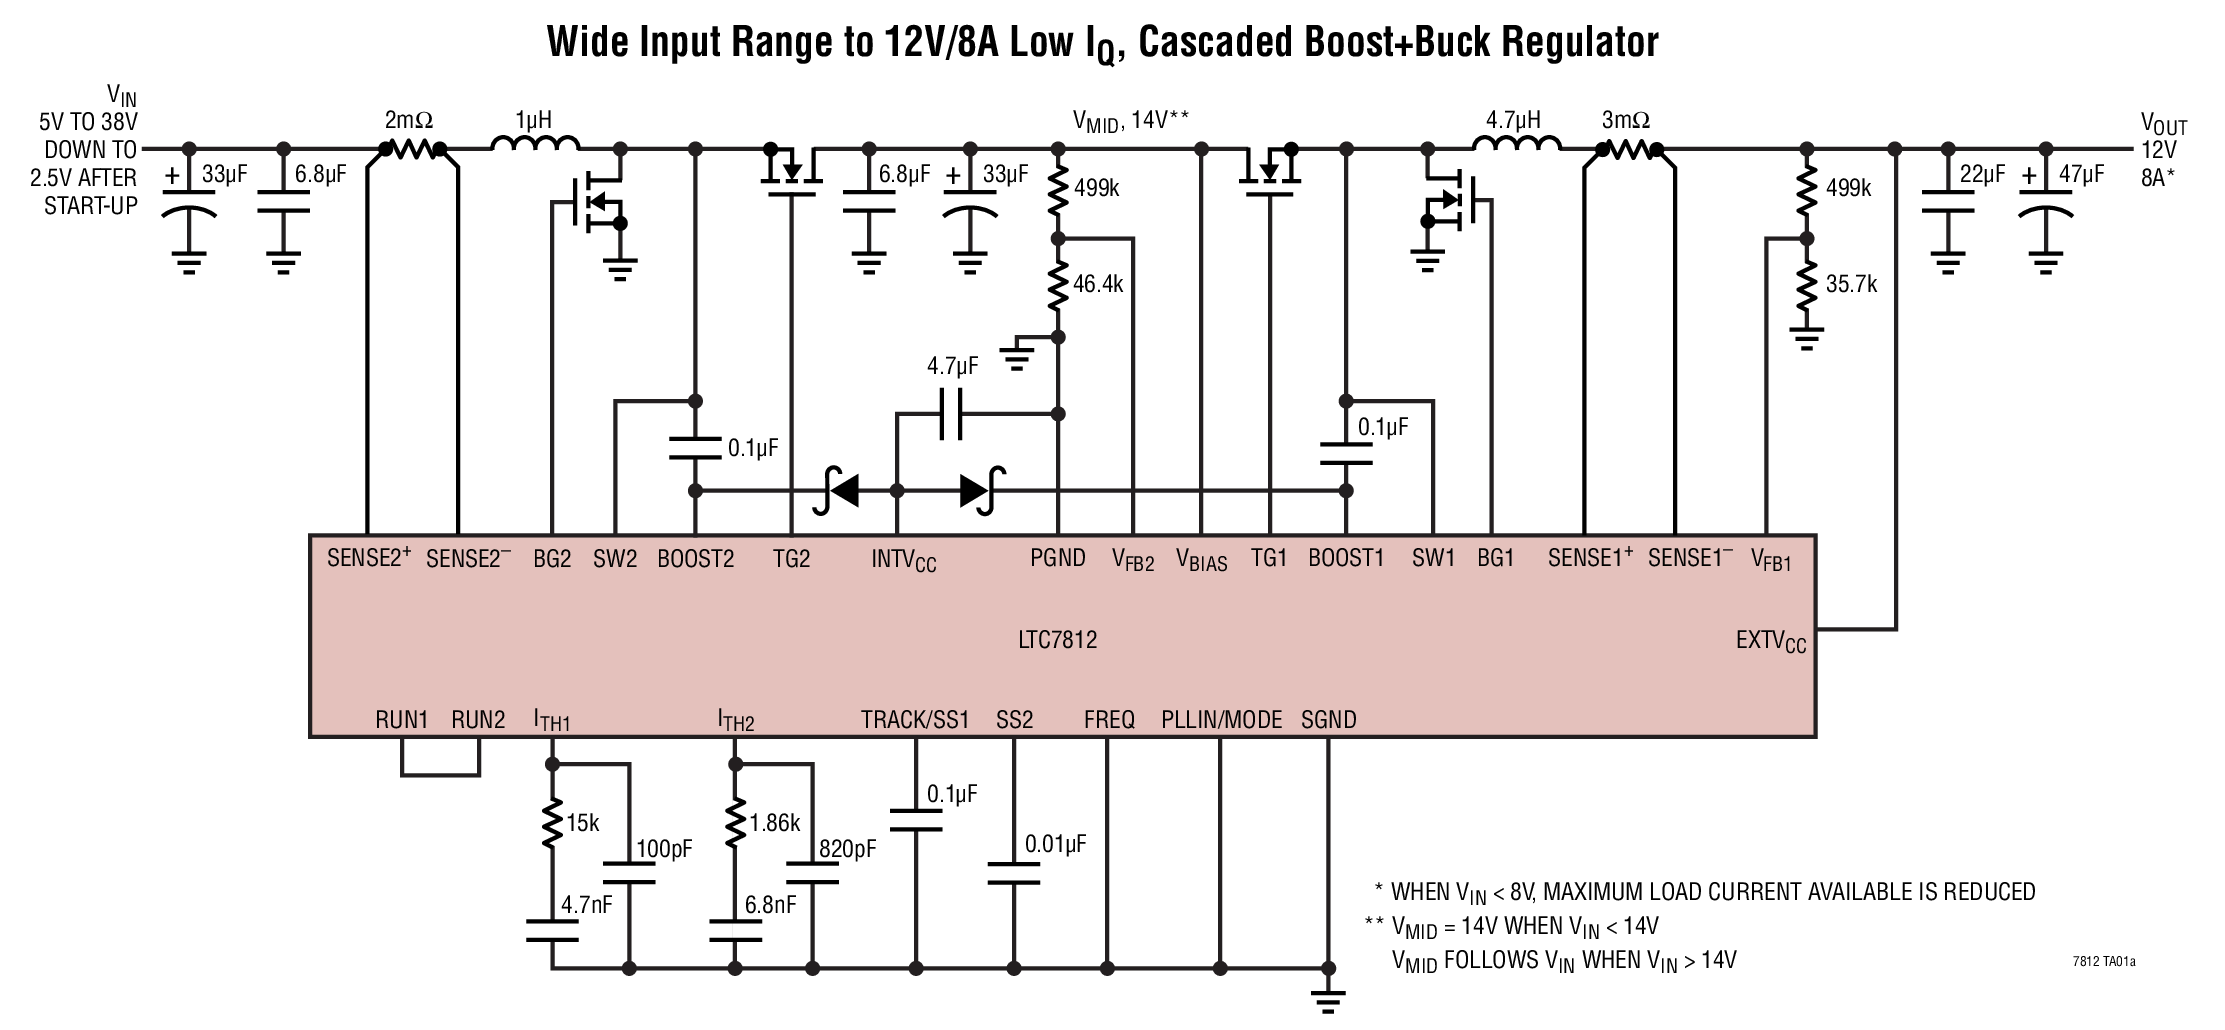 Single Regulator contains buck and boost controllers